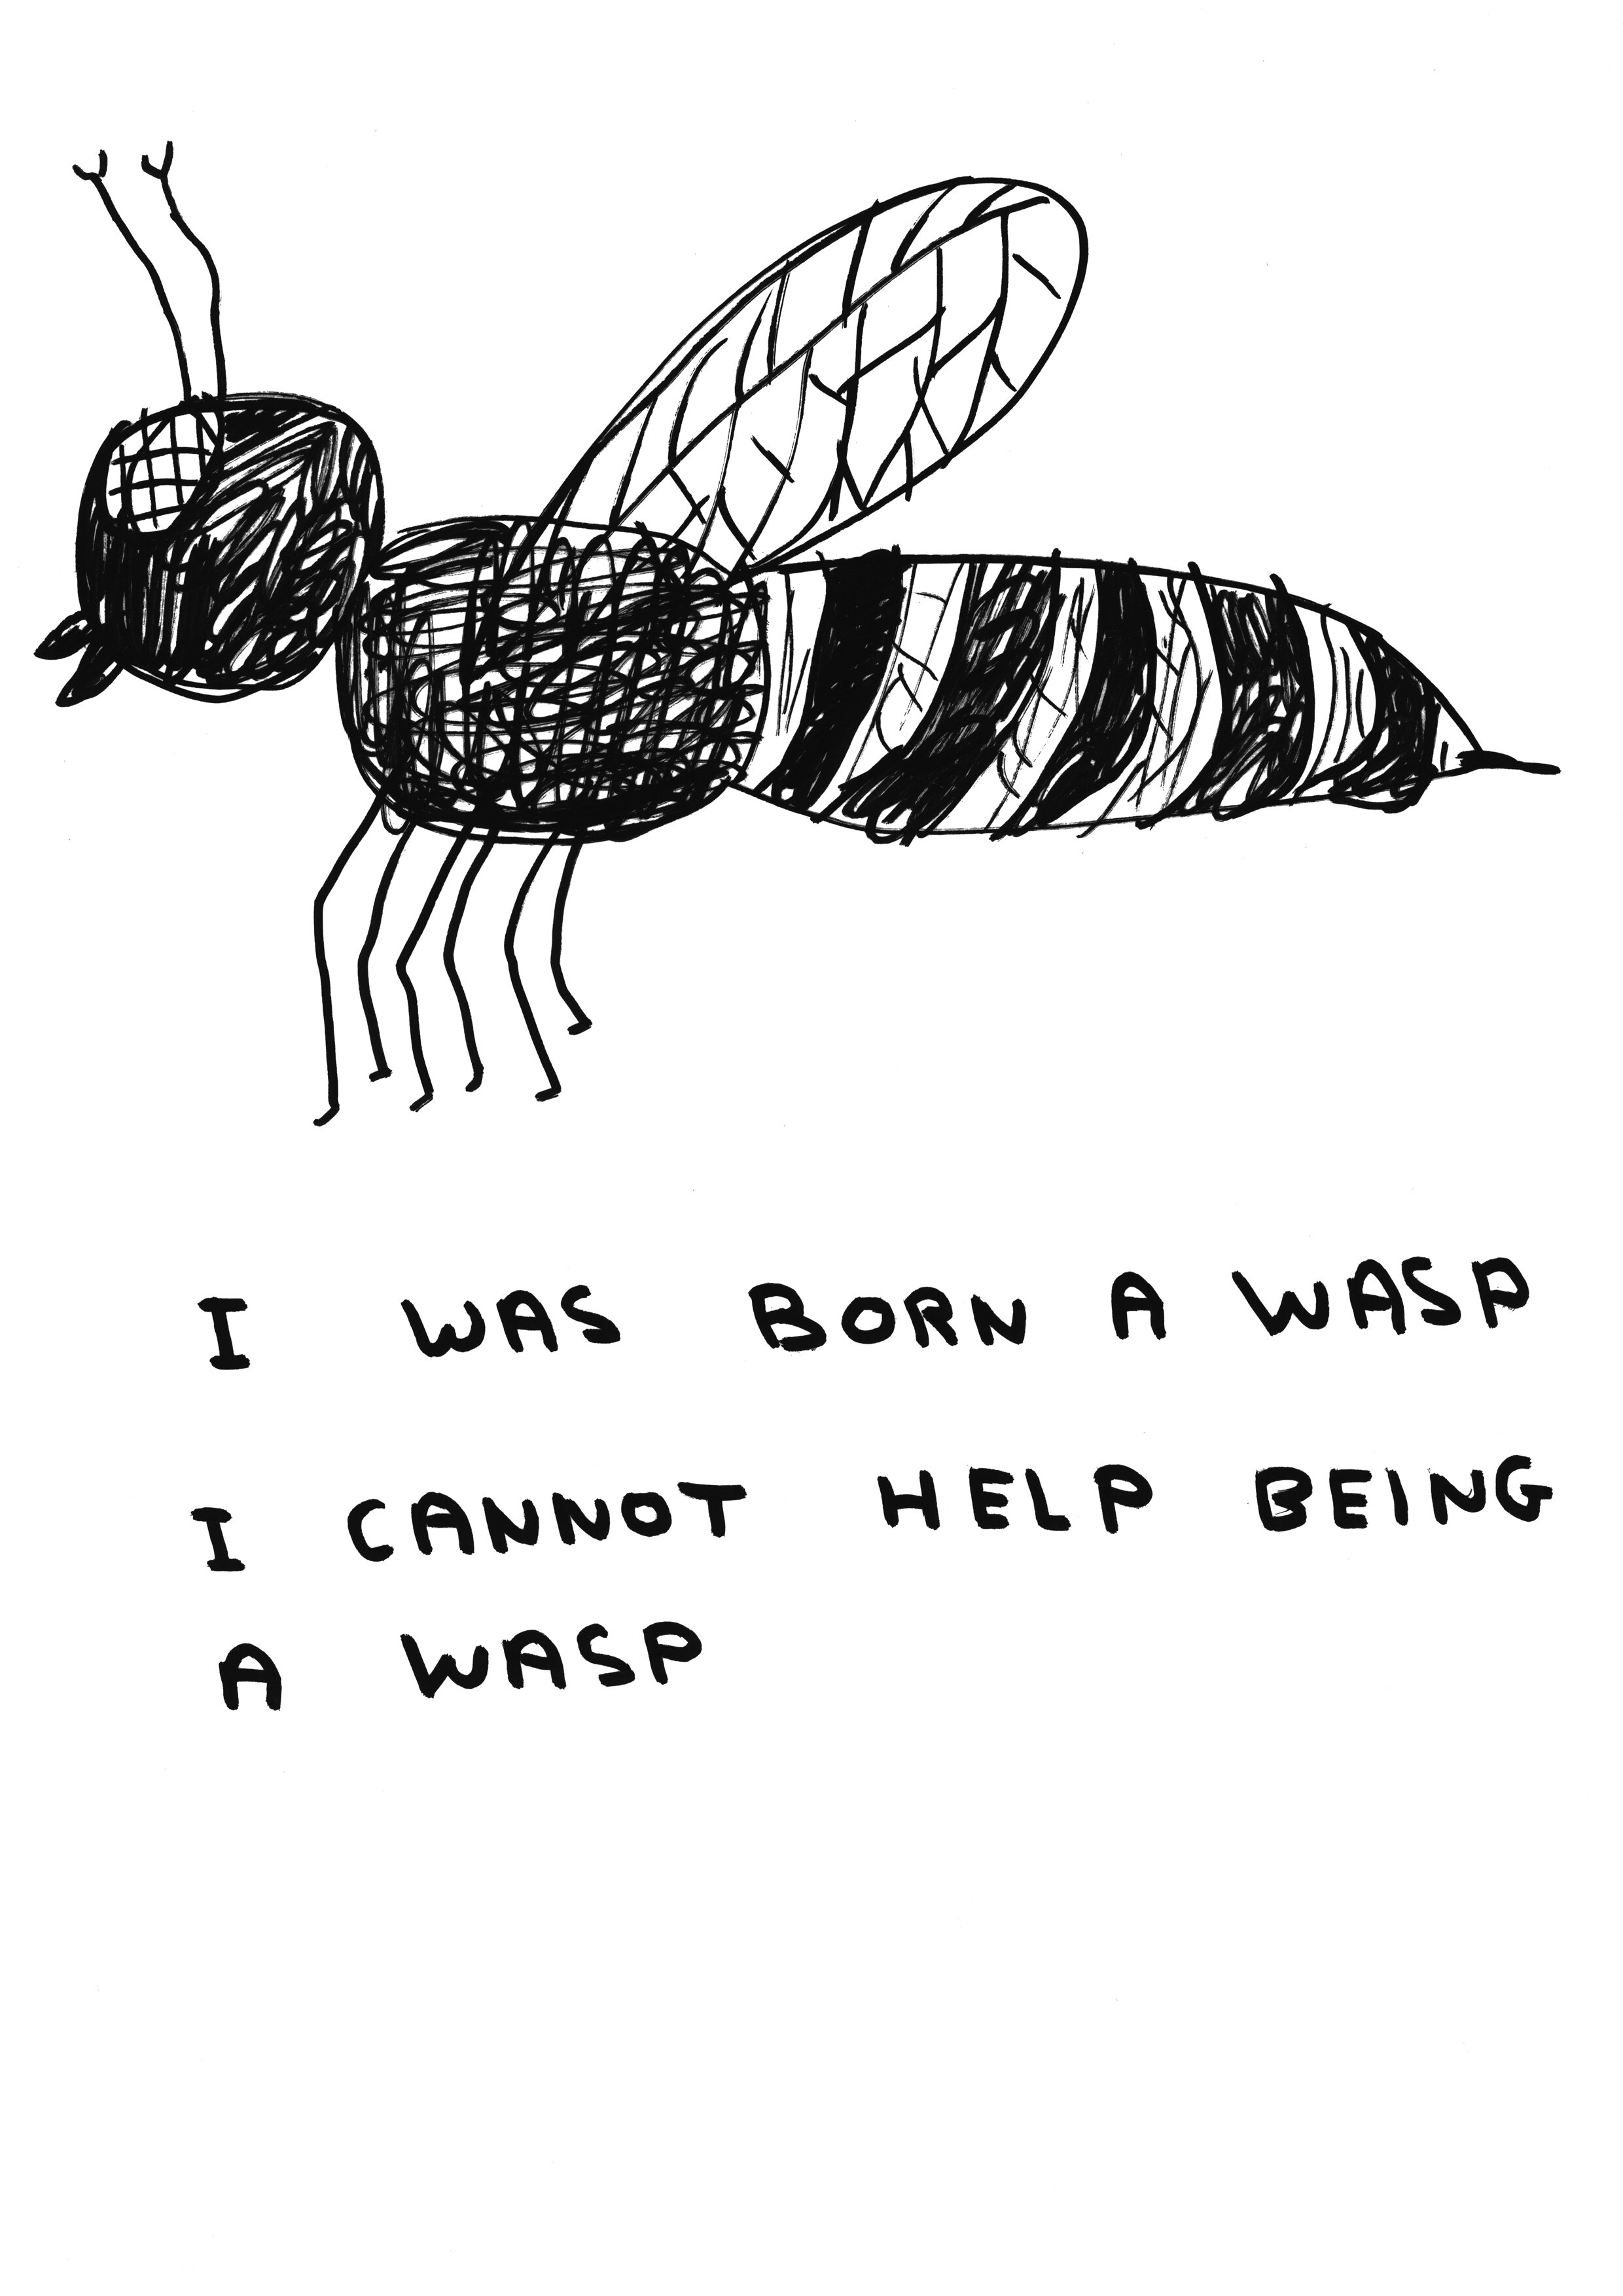 David Shrigley, Untitled (I was born a wasp), 2010, drawing on paper